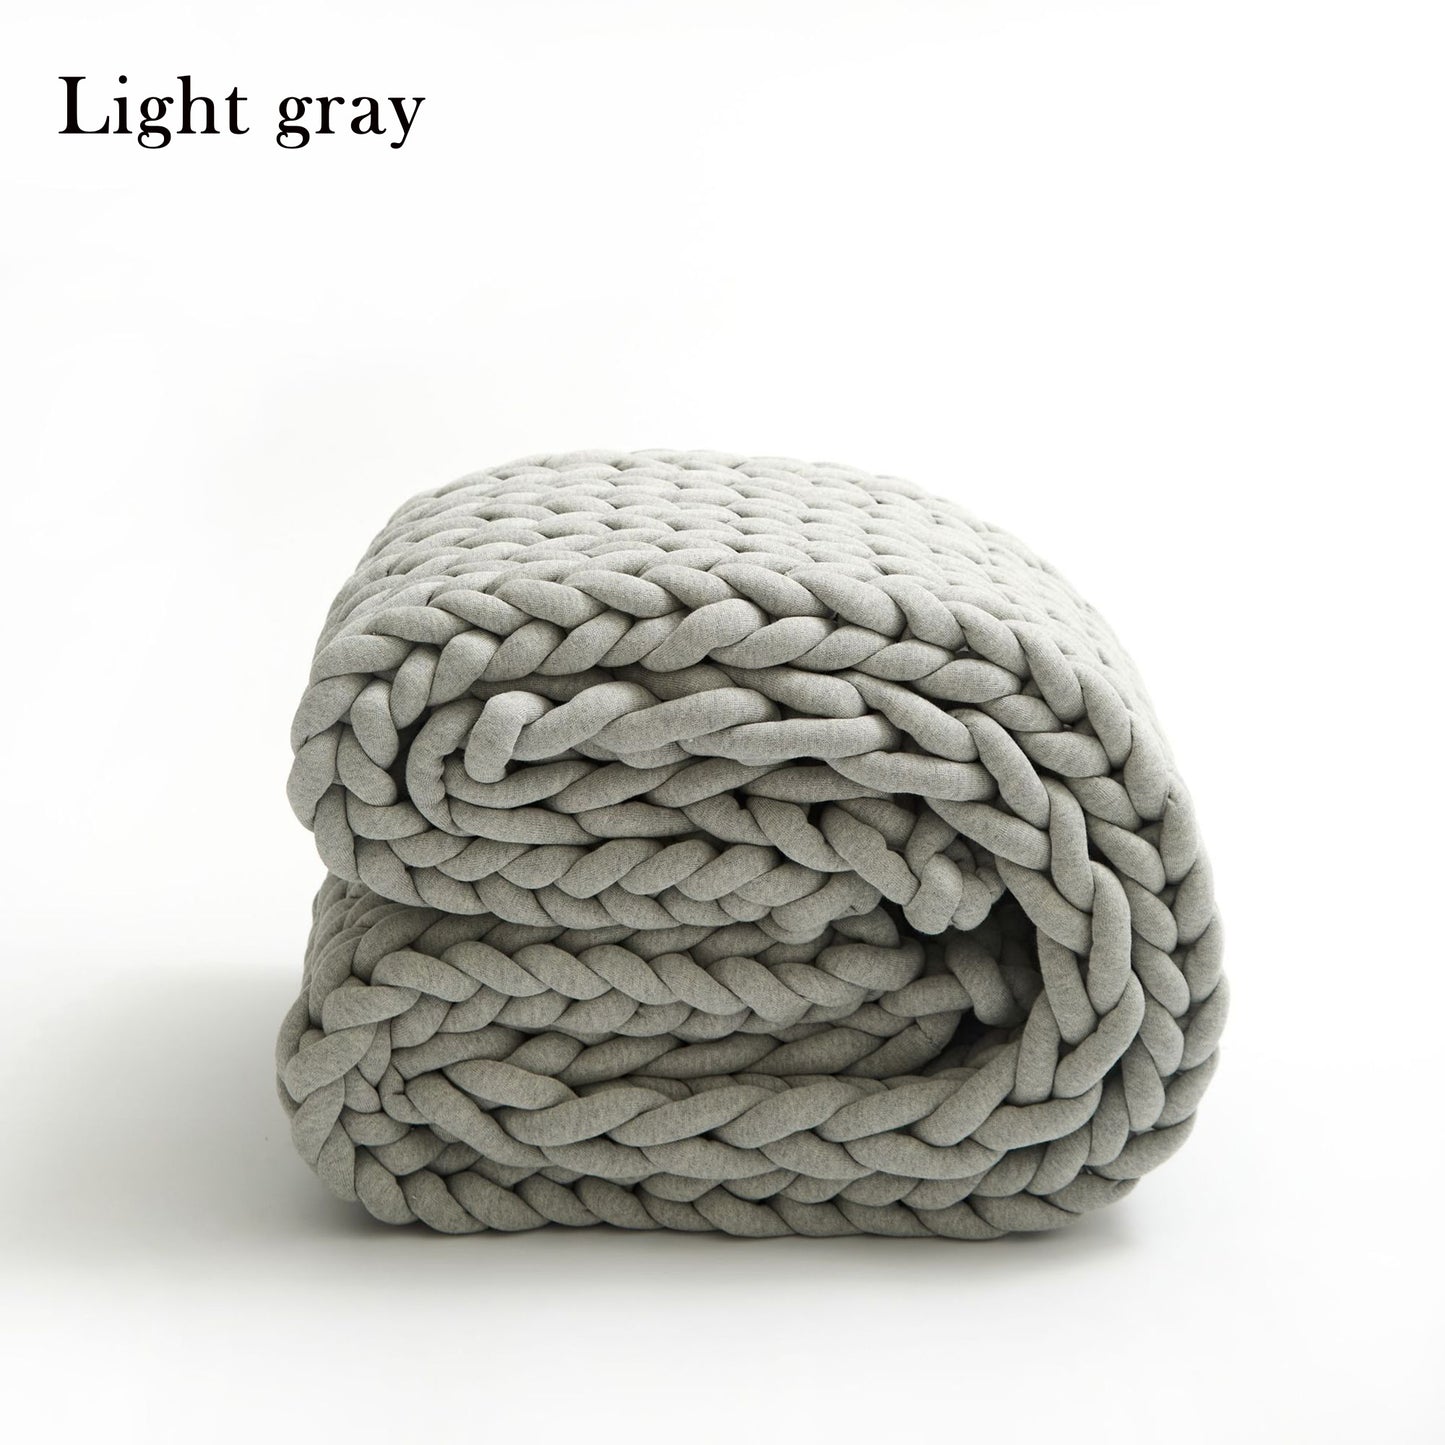 Chunky Knitted Blanket for Sofa Decor │ New Core-filled Yarn Hand-woven Gravity Blanket │ Neutral Color Decompression comfortable Blanket  Besontique